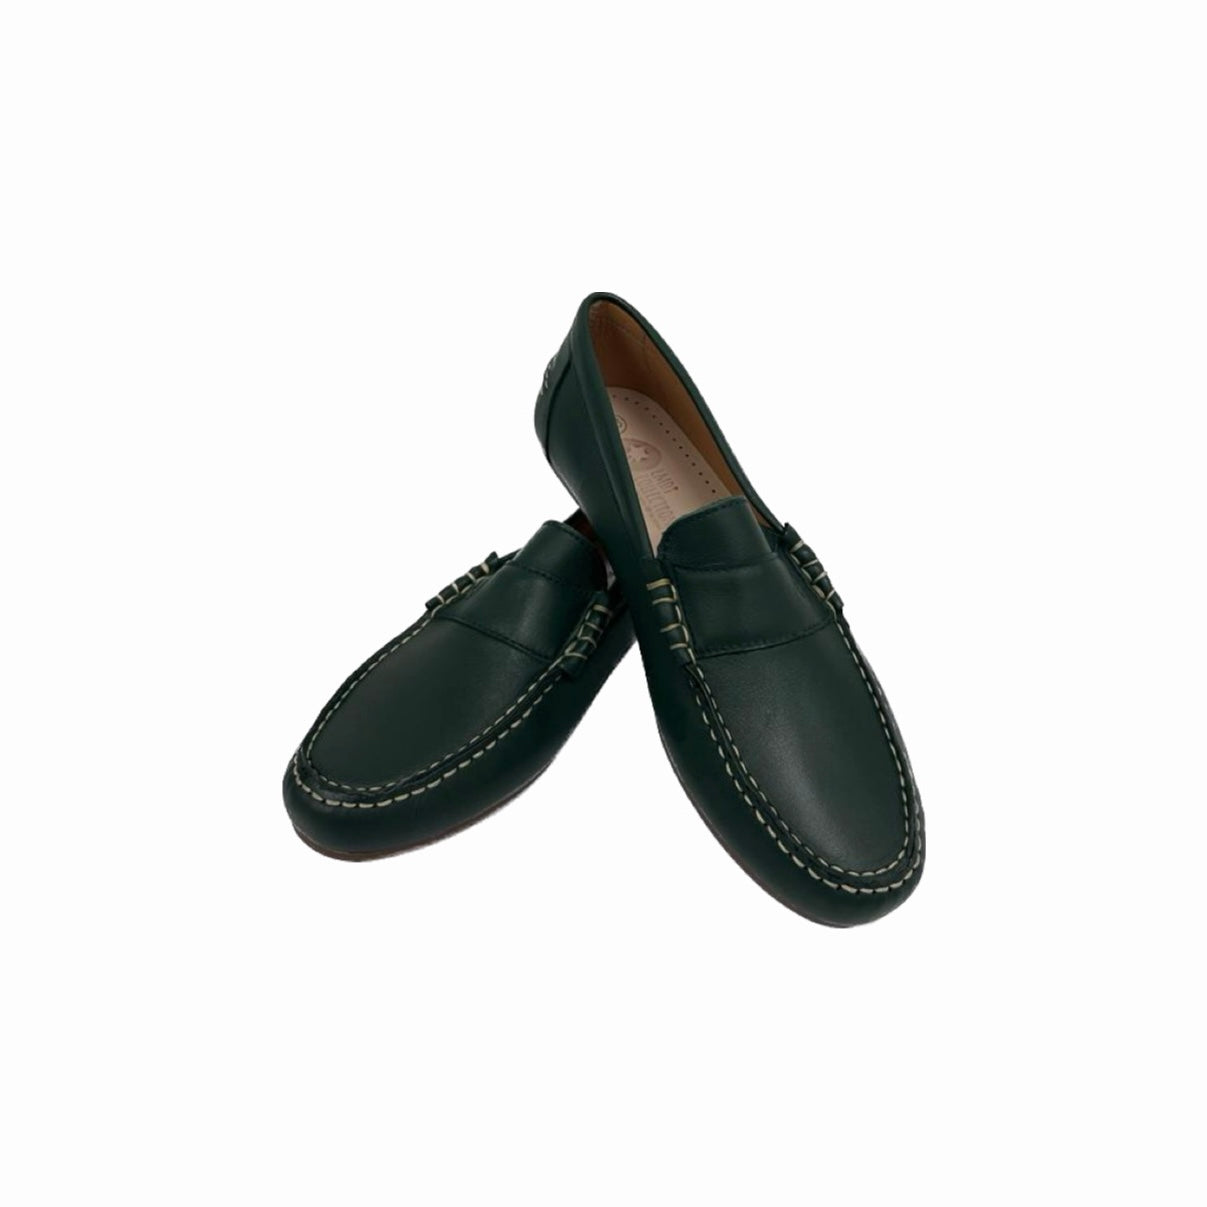 WAND BASIC LOAFER IN FOREST